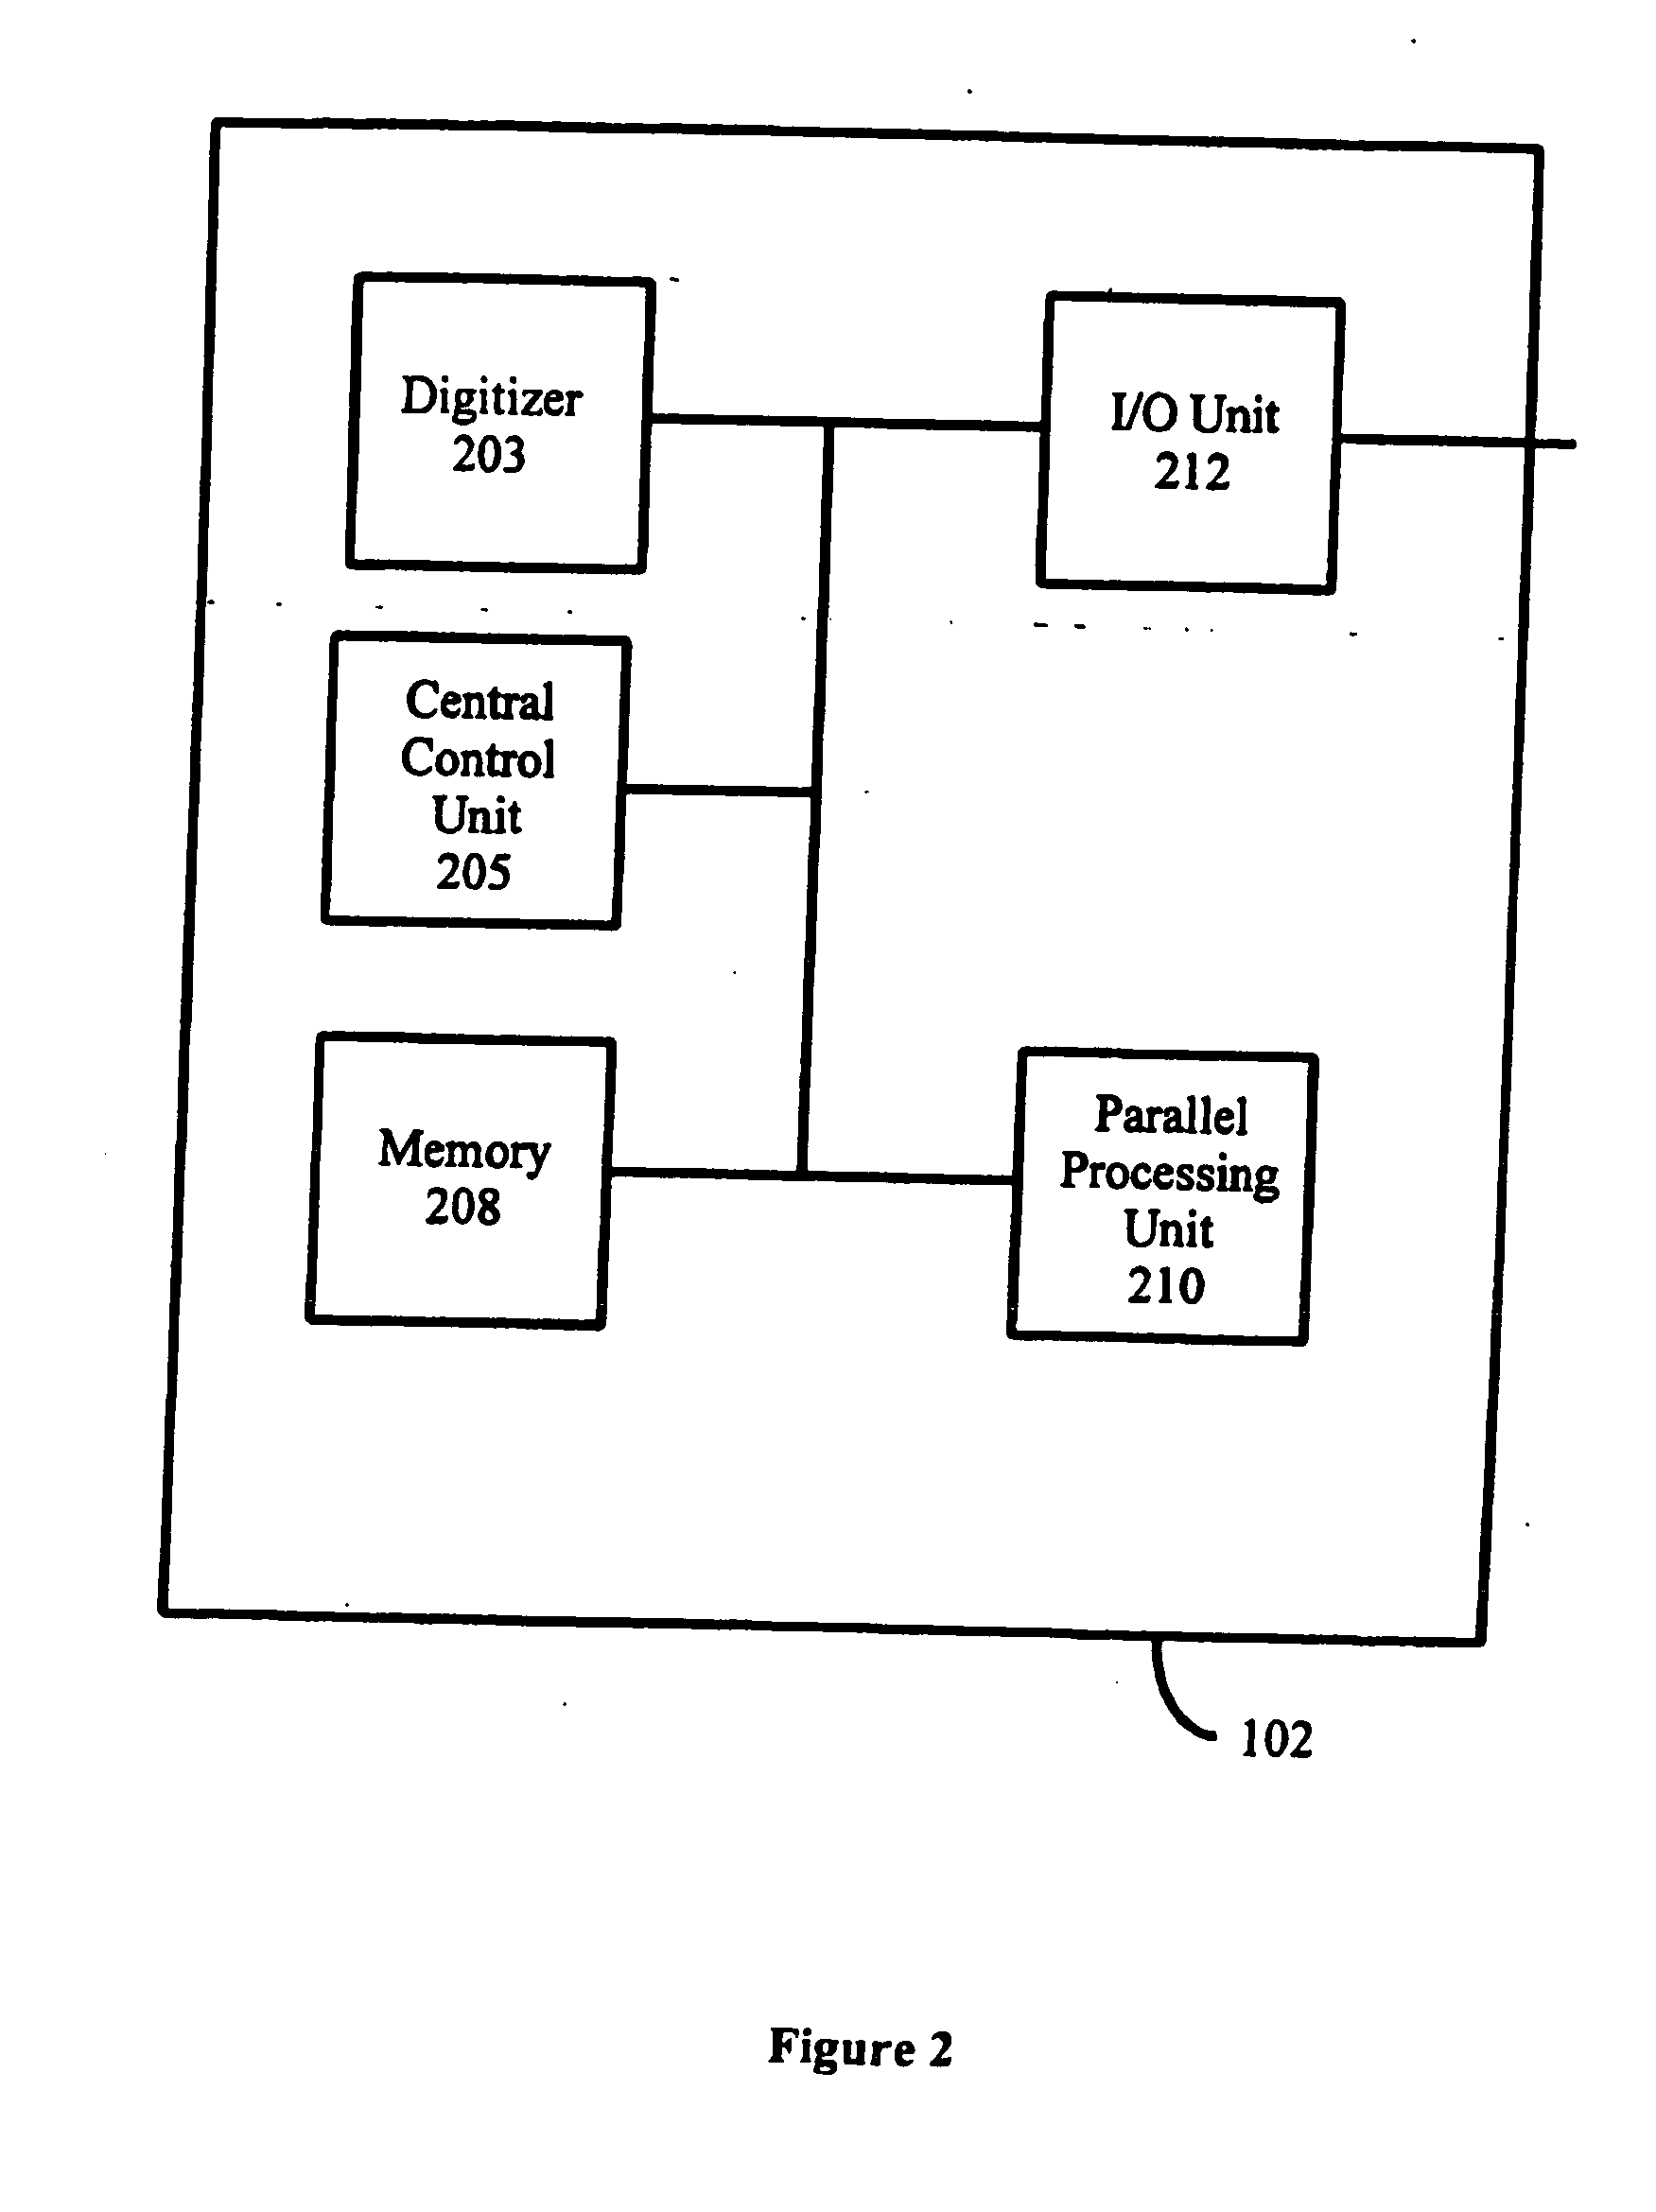 Method and system for automatic identification and orientation of medical images